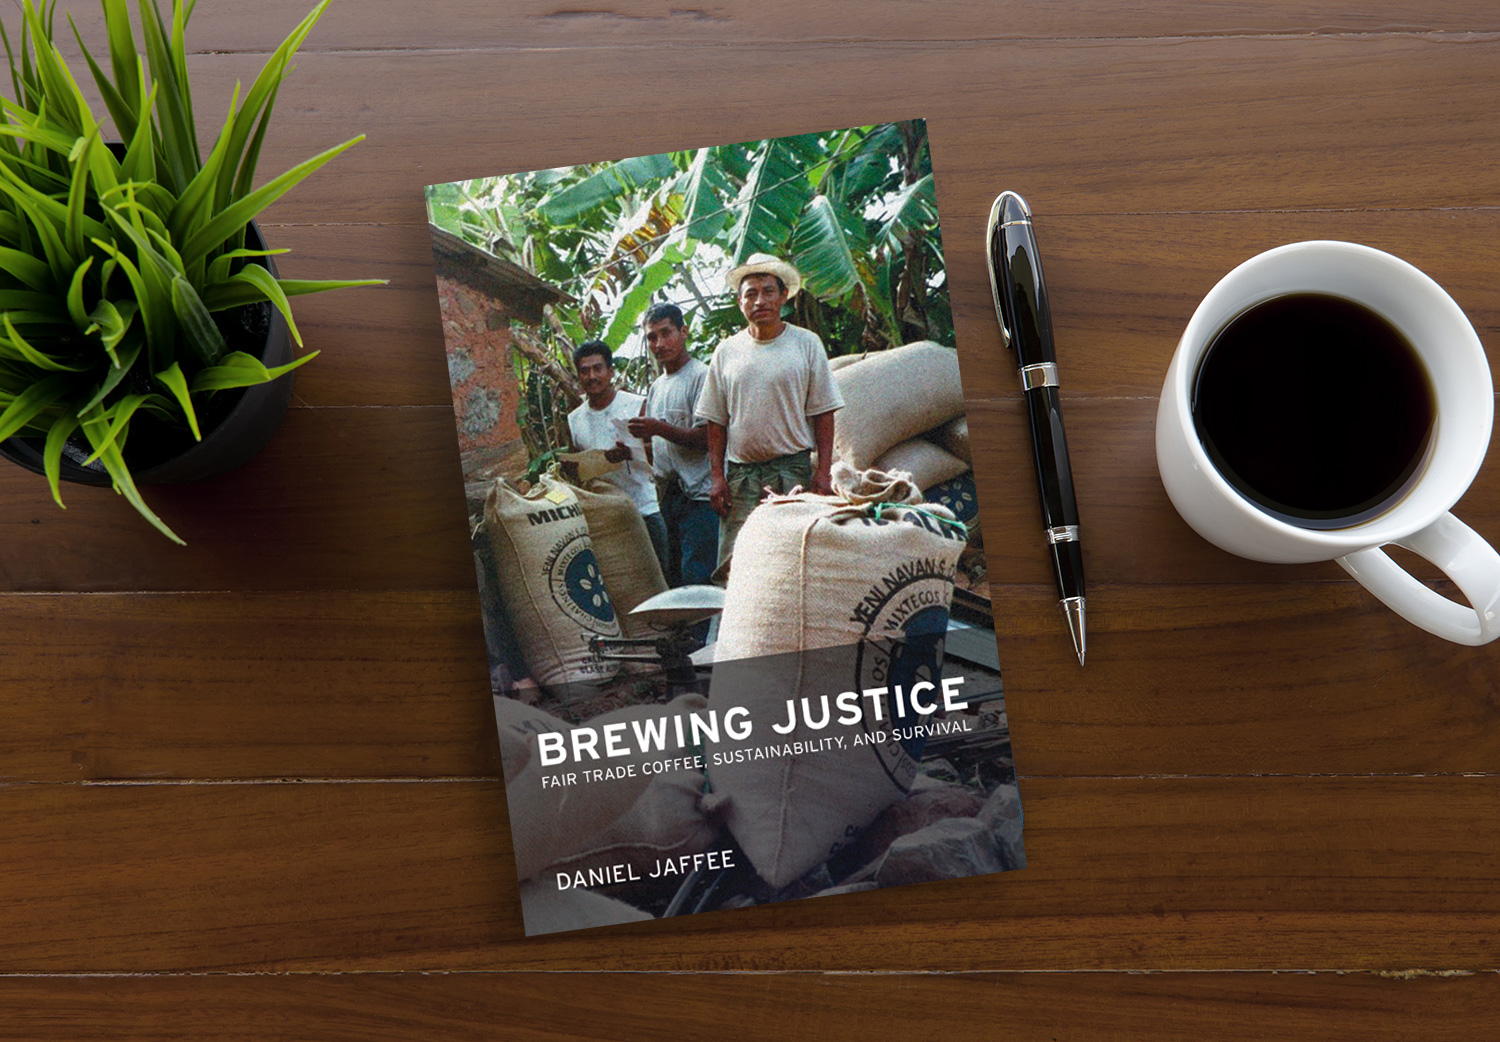 Brewing Justice by Daniel Jaffee on a wooden table.